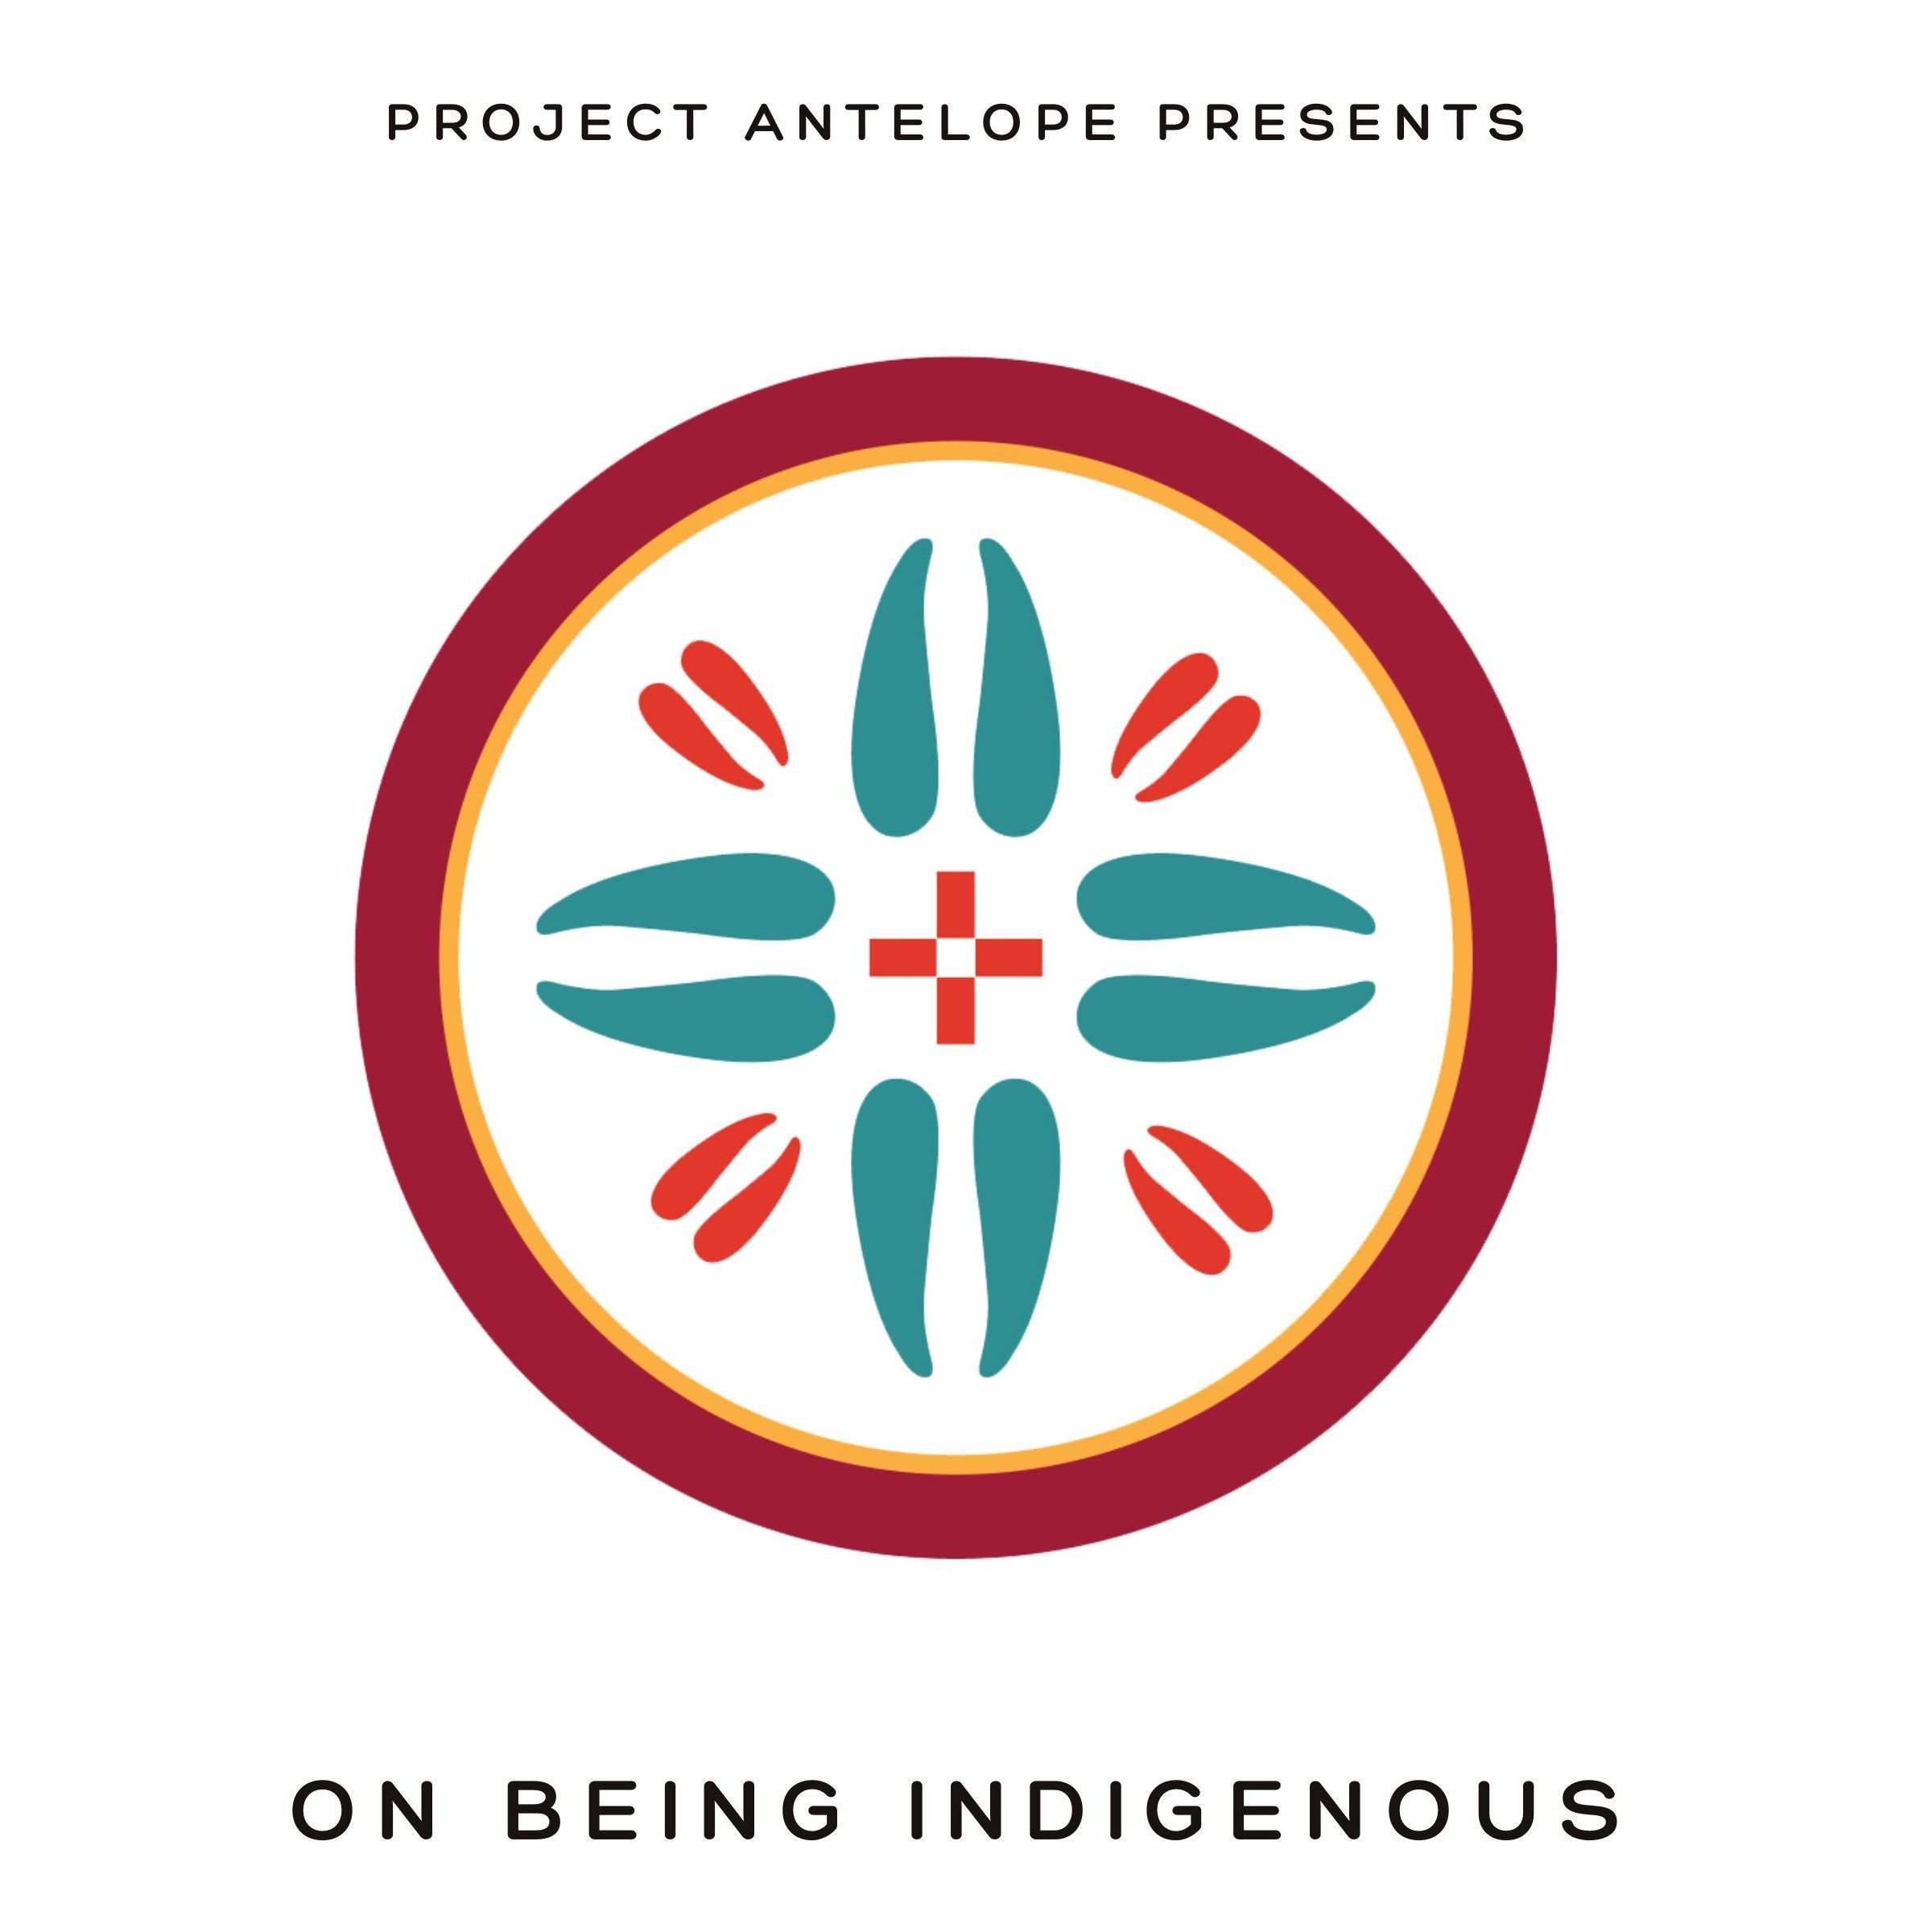 On Being Indigenous